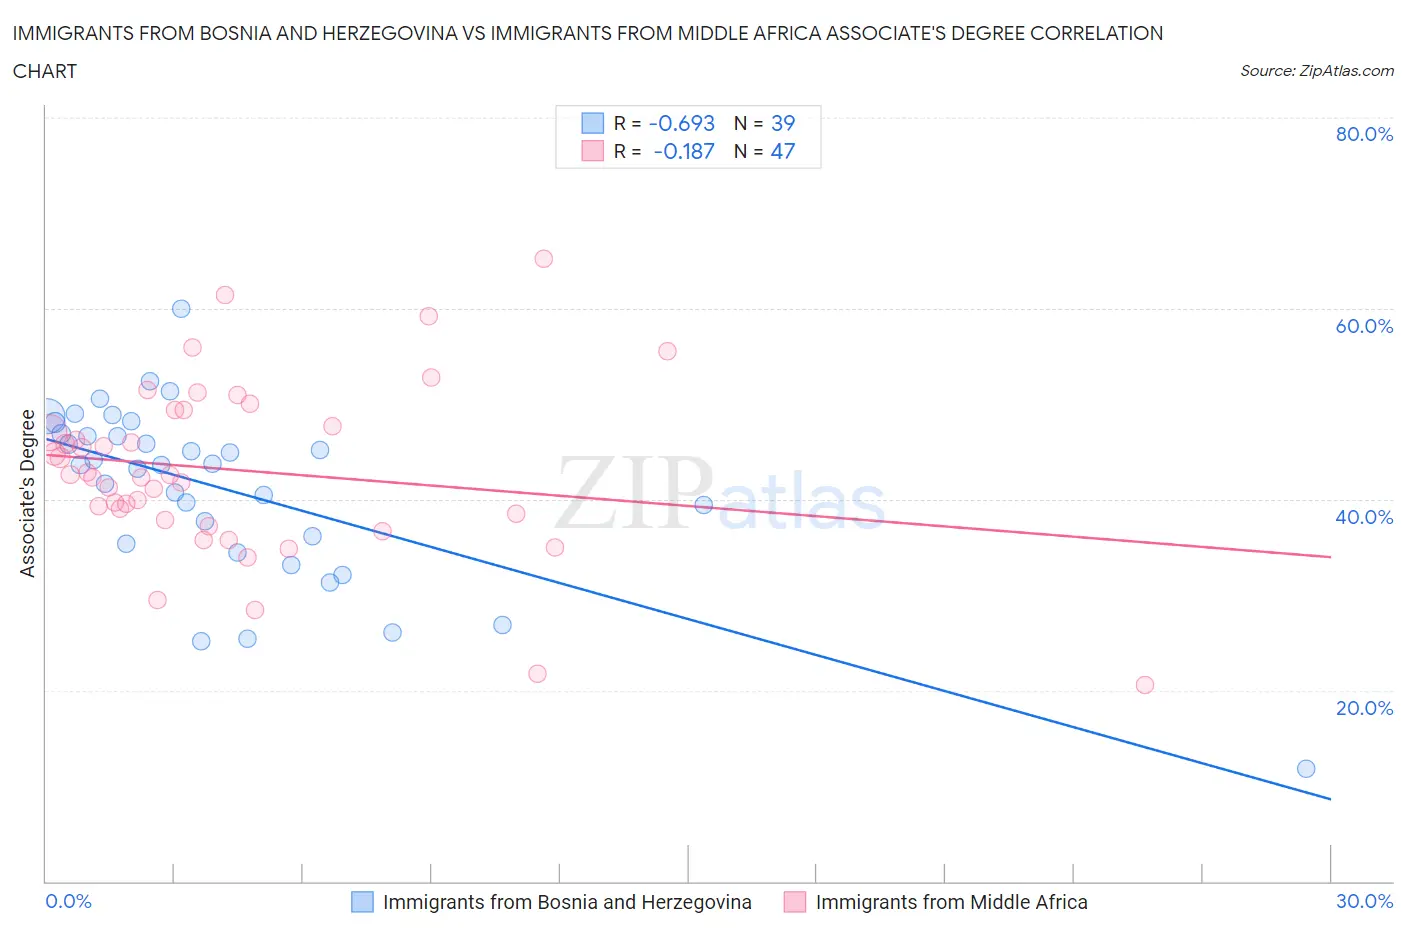 Immigrants from Bosnia and Herzegovina vs Immigrants from Middle Africa Associate's Degree